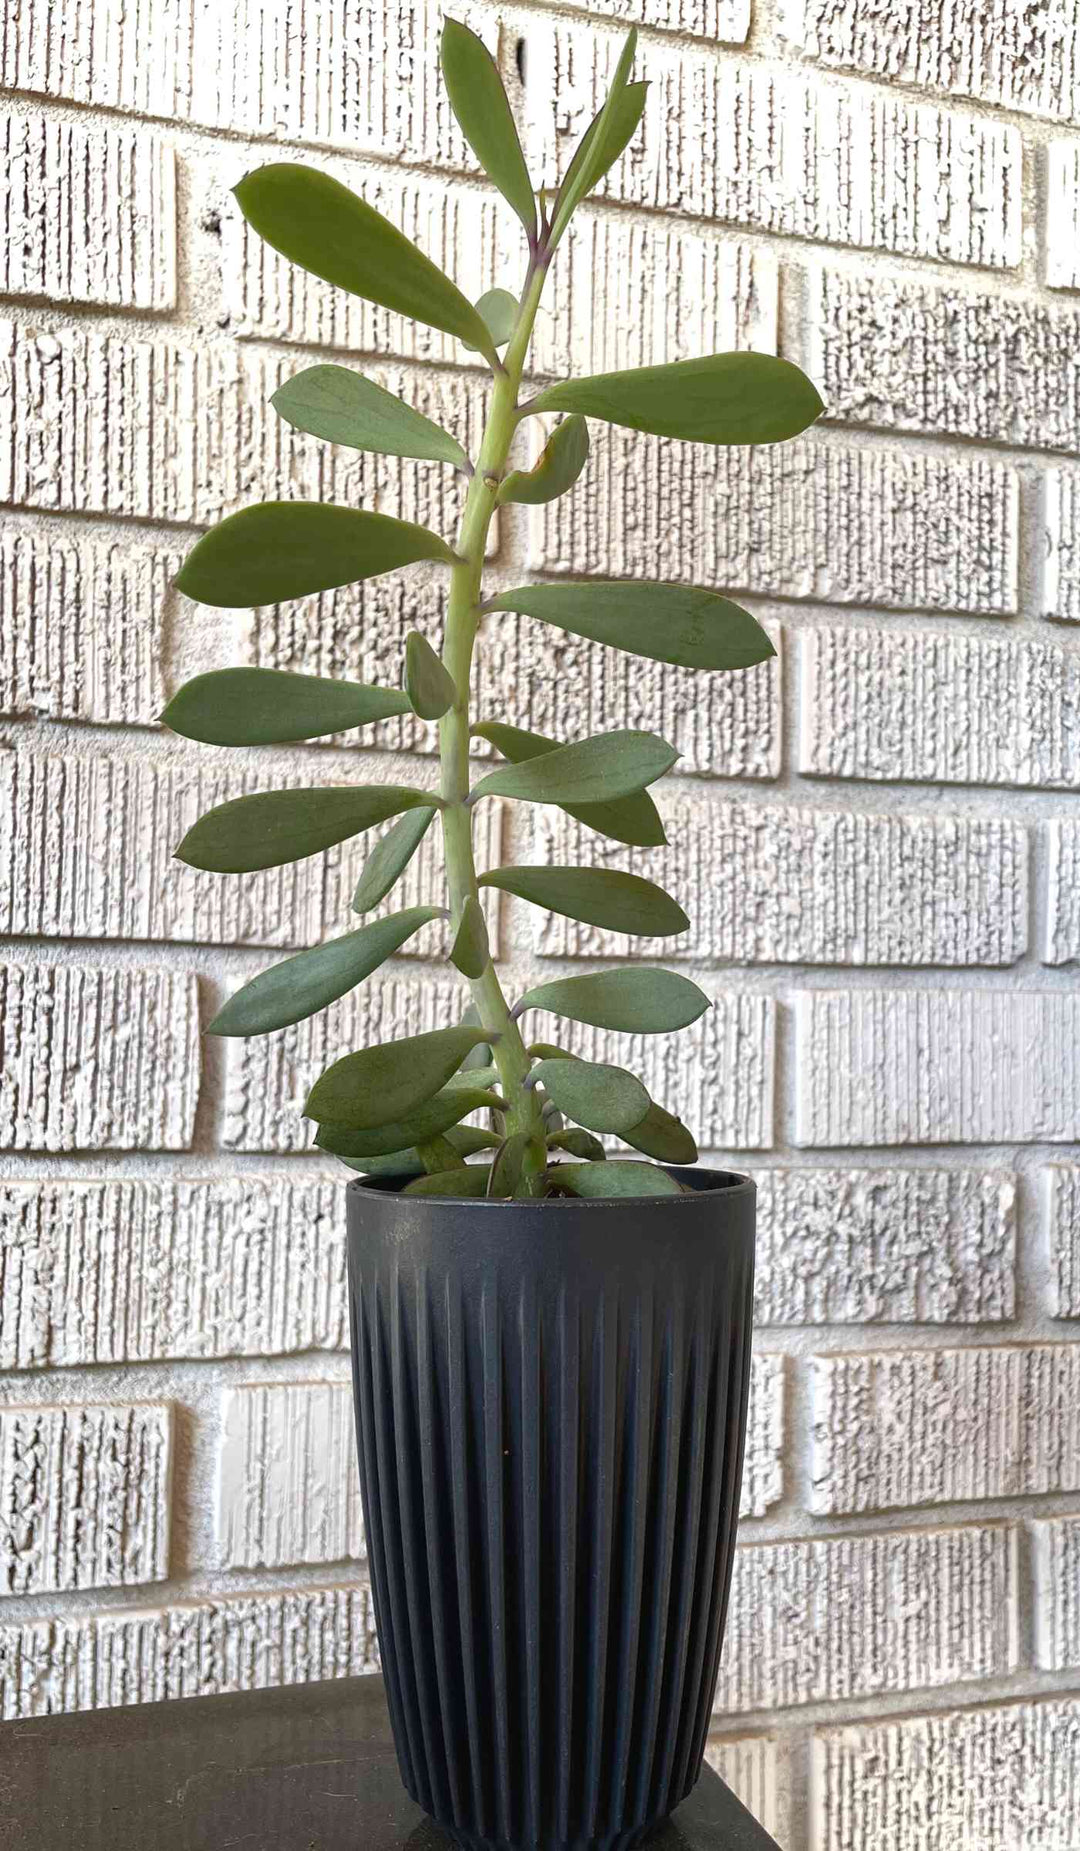 HuskeeCup and lid in charcoal color, shown repurposed as a planter with succulent and whitewashed brick in background.